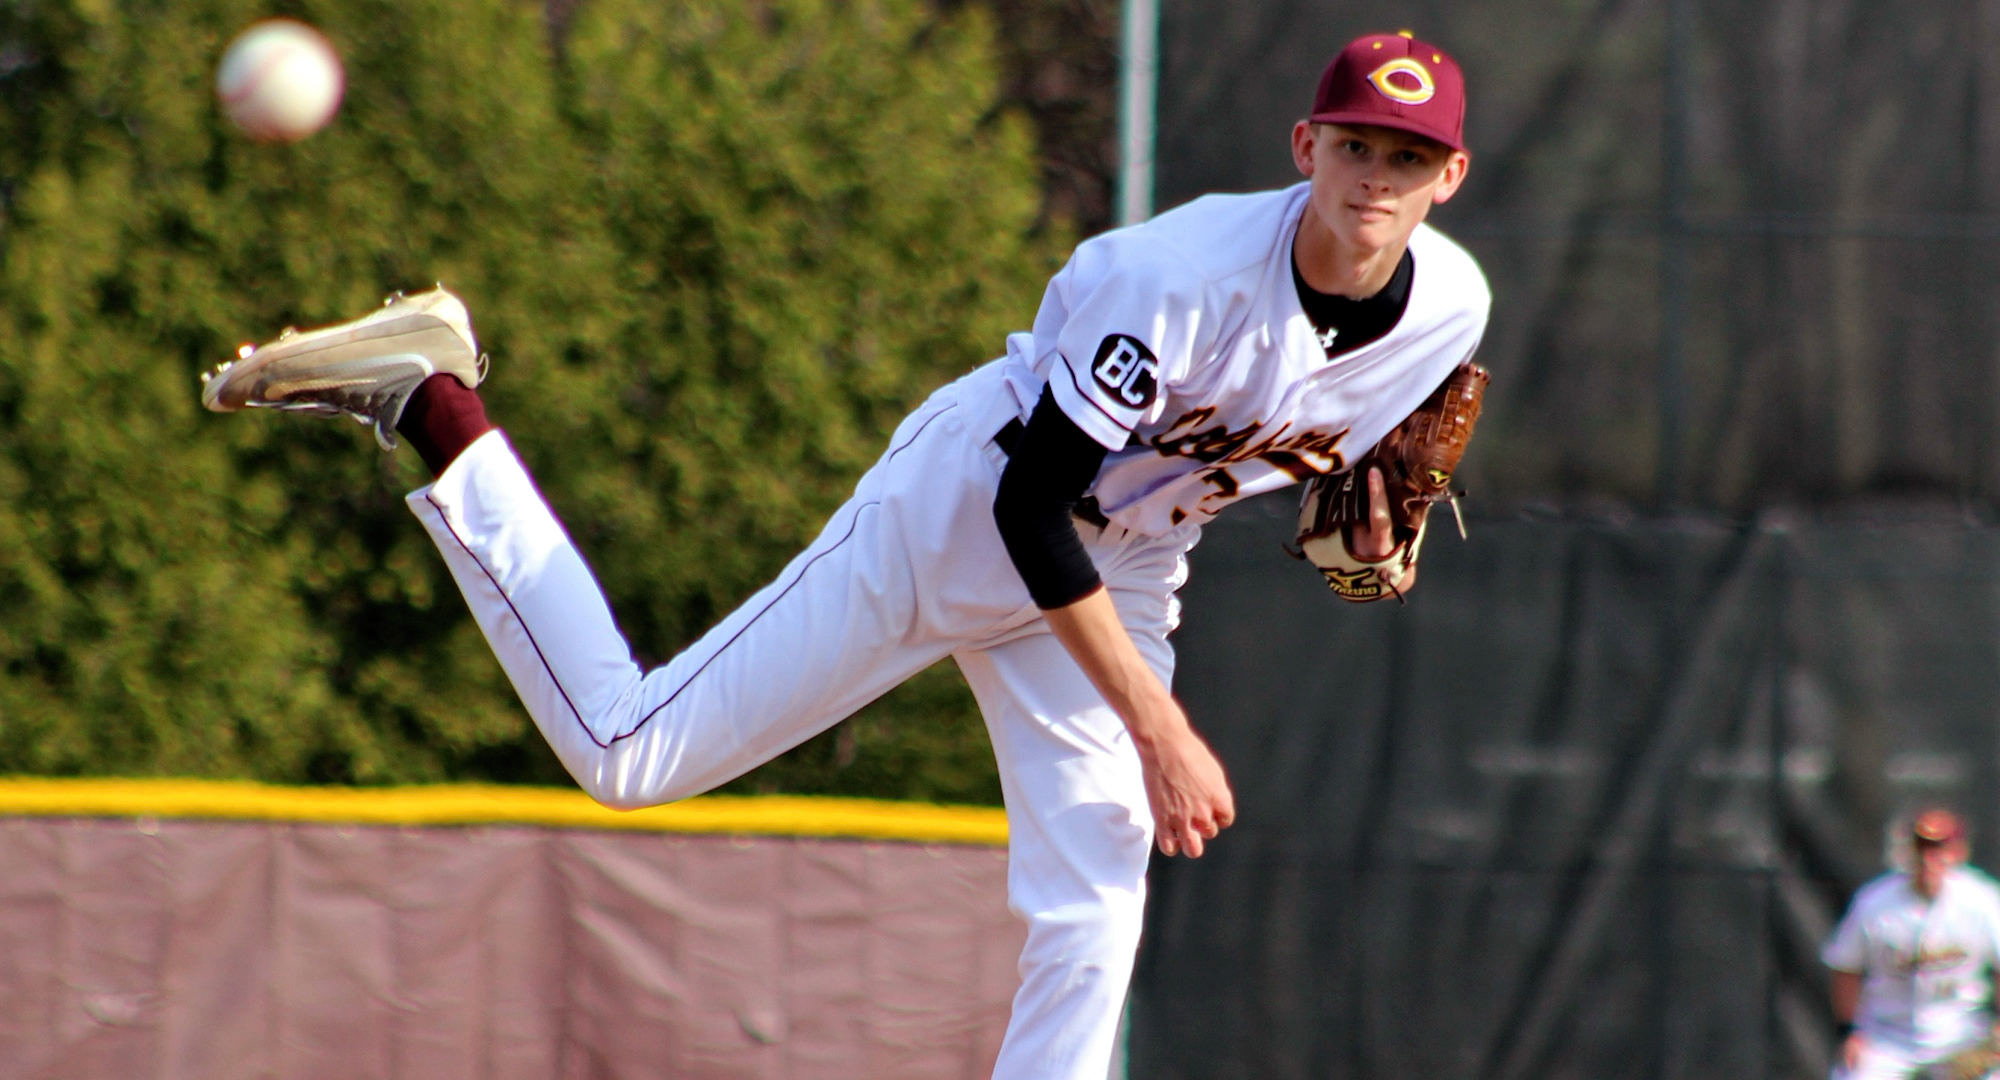 Freshman pitcher Ty Syverson pitched 3.0 innigns and only allowed one hit to pick up his first collegiate win.